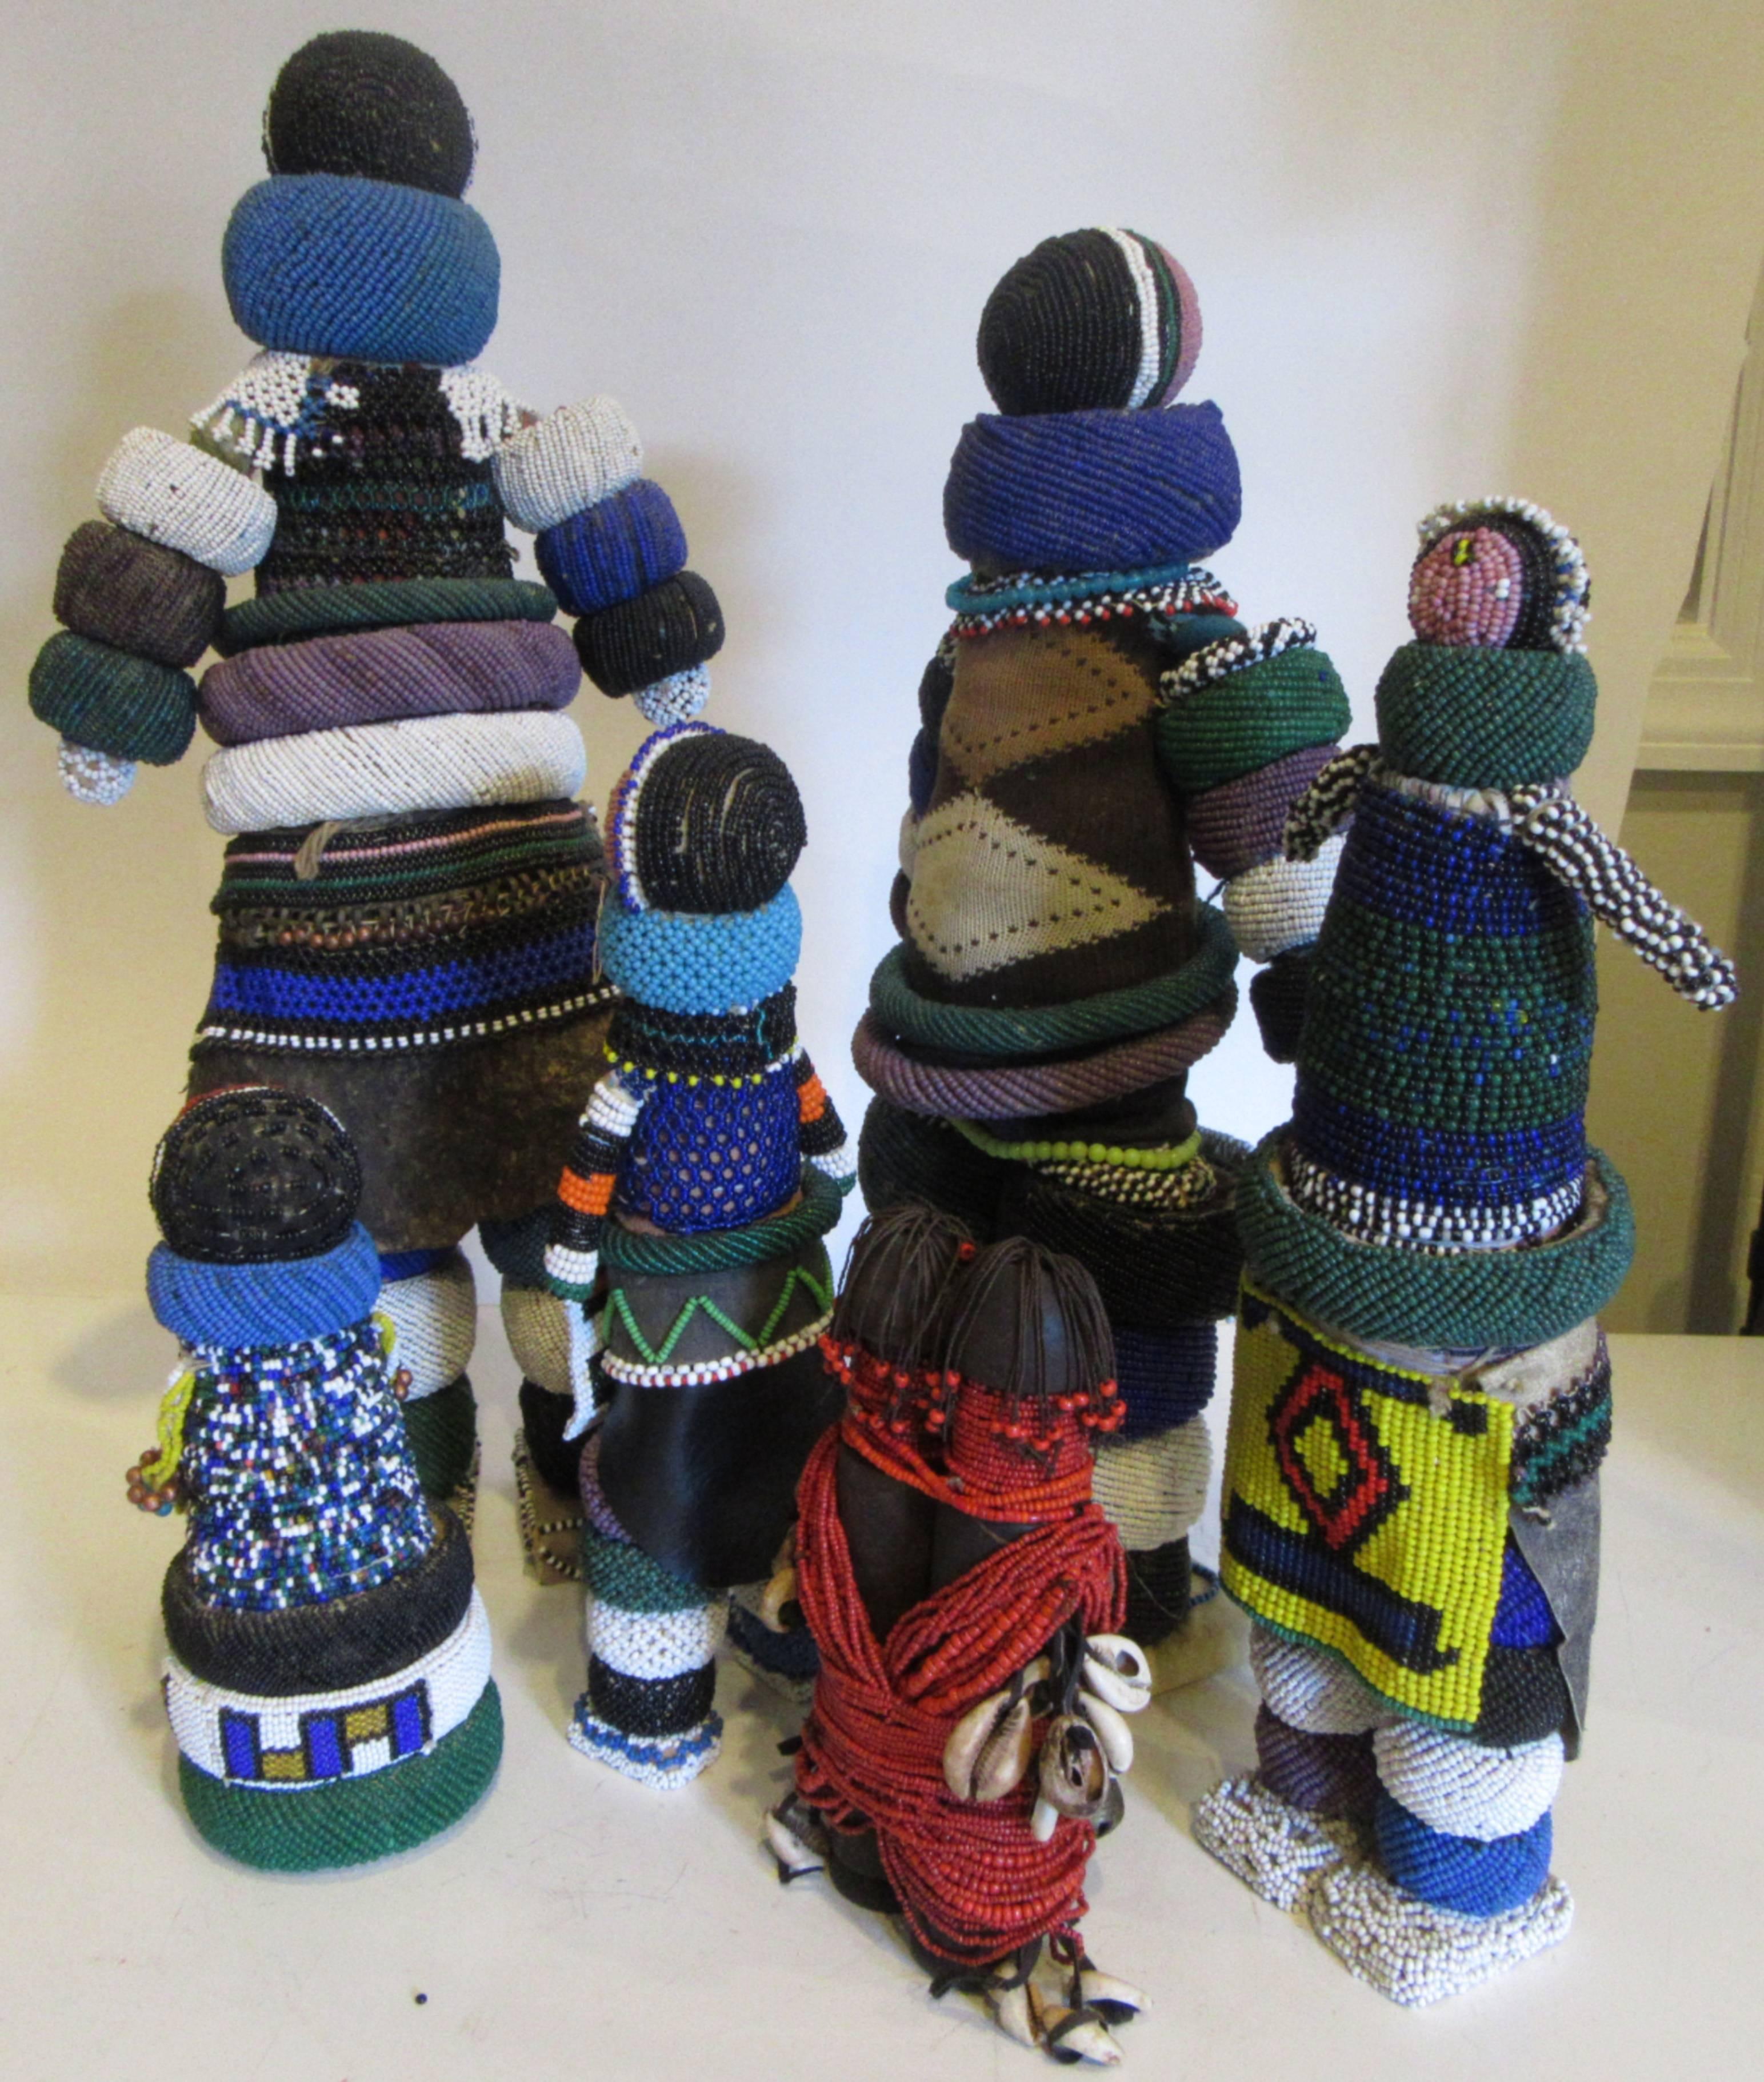 A group of six collected Ndebele hand beaded fertility dolls of various sizes and designs. The dolls are made in secret by the maternal grandmother of the bride and ritually presented when she moves into her new home.